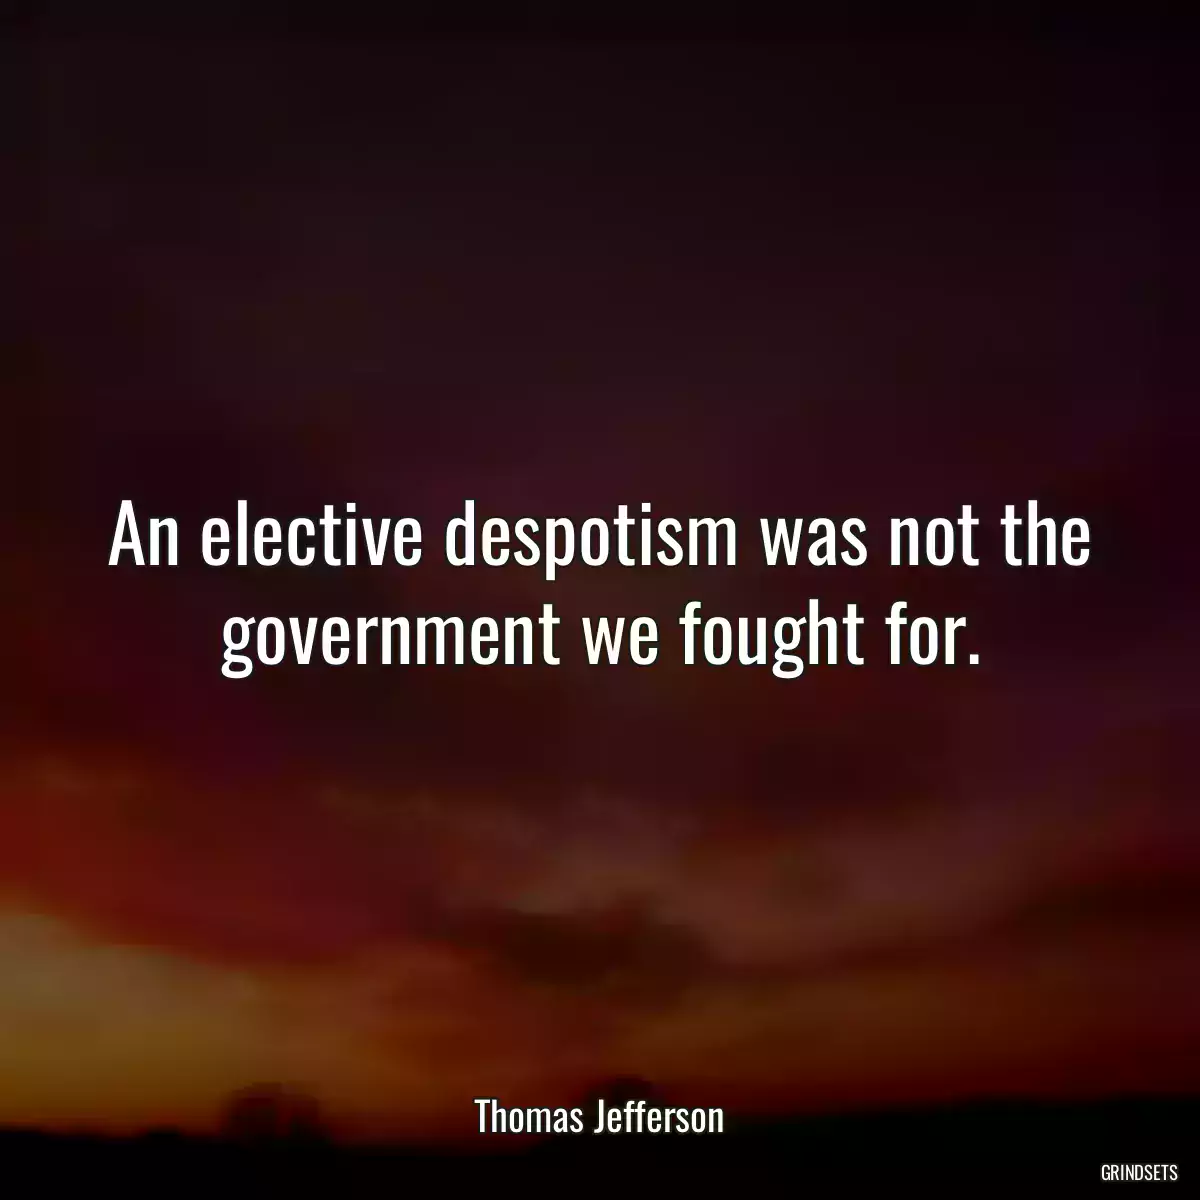 An elective despotism was not the government we fought for.